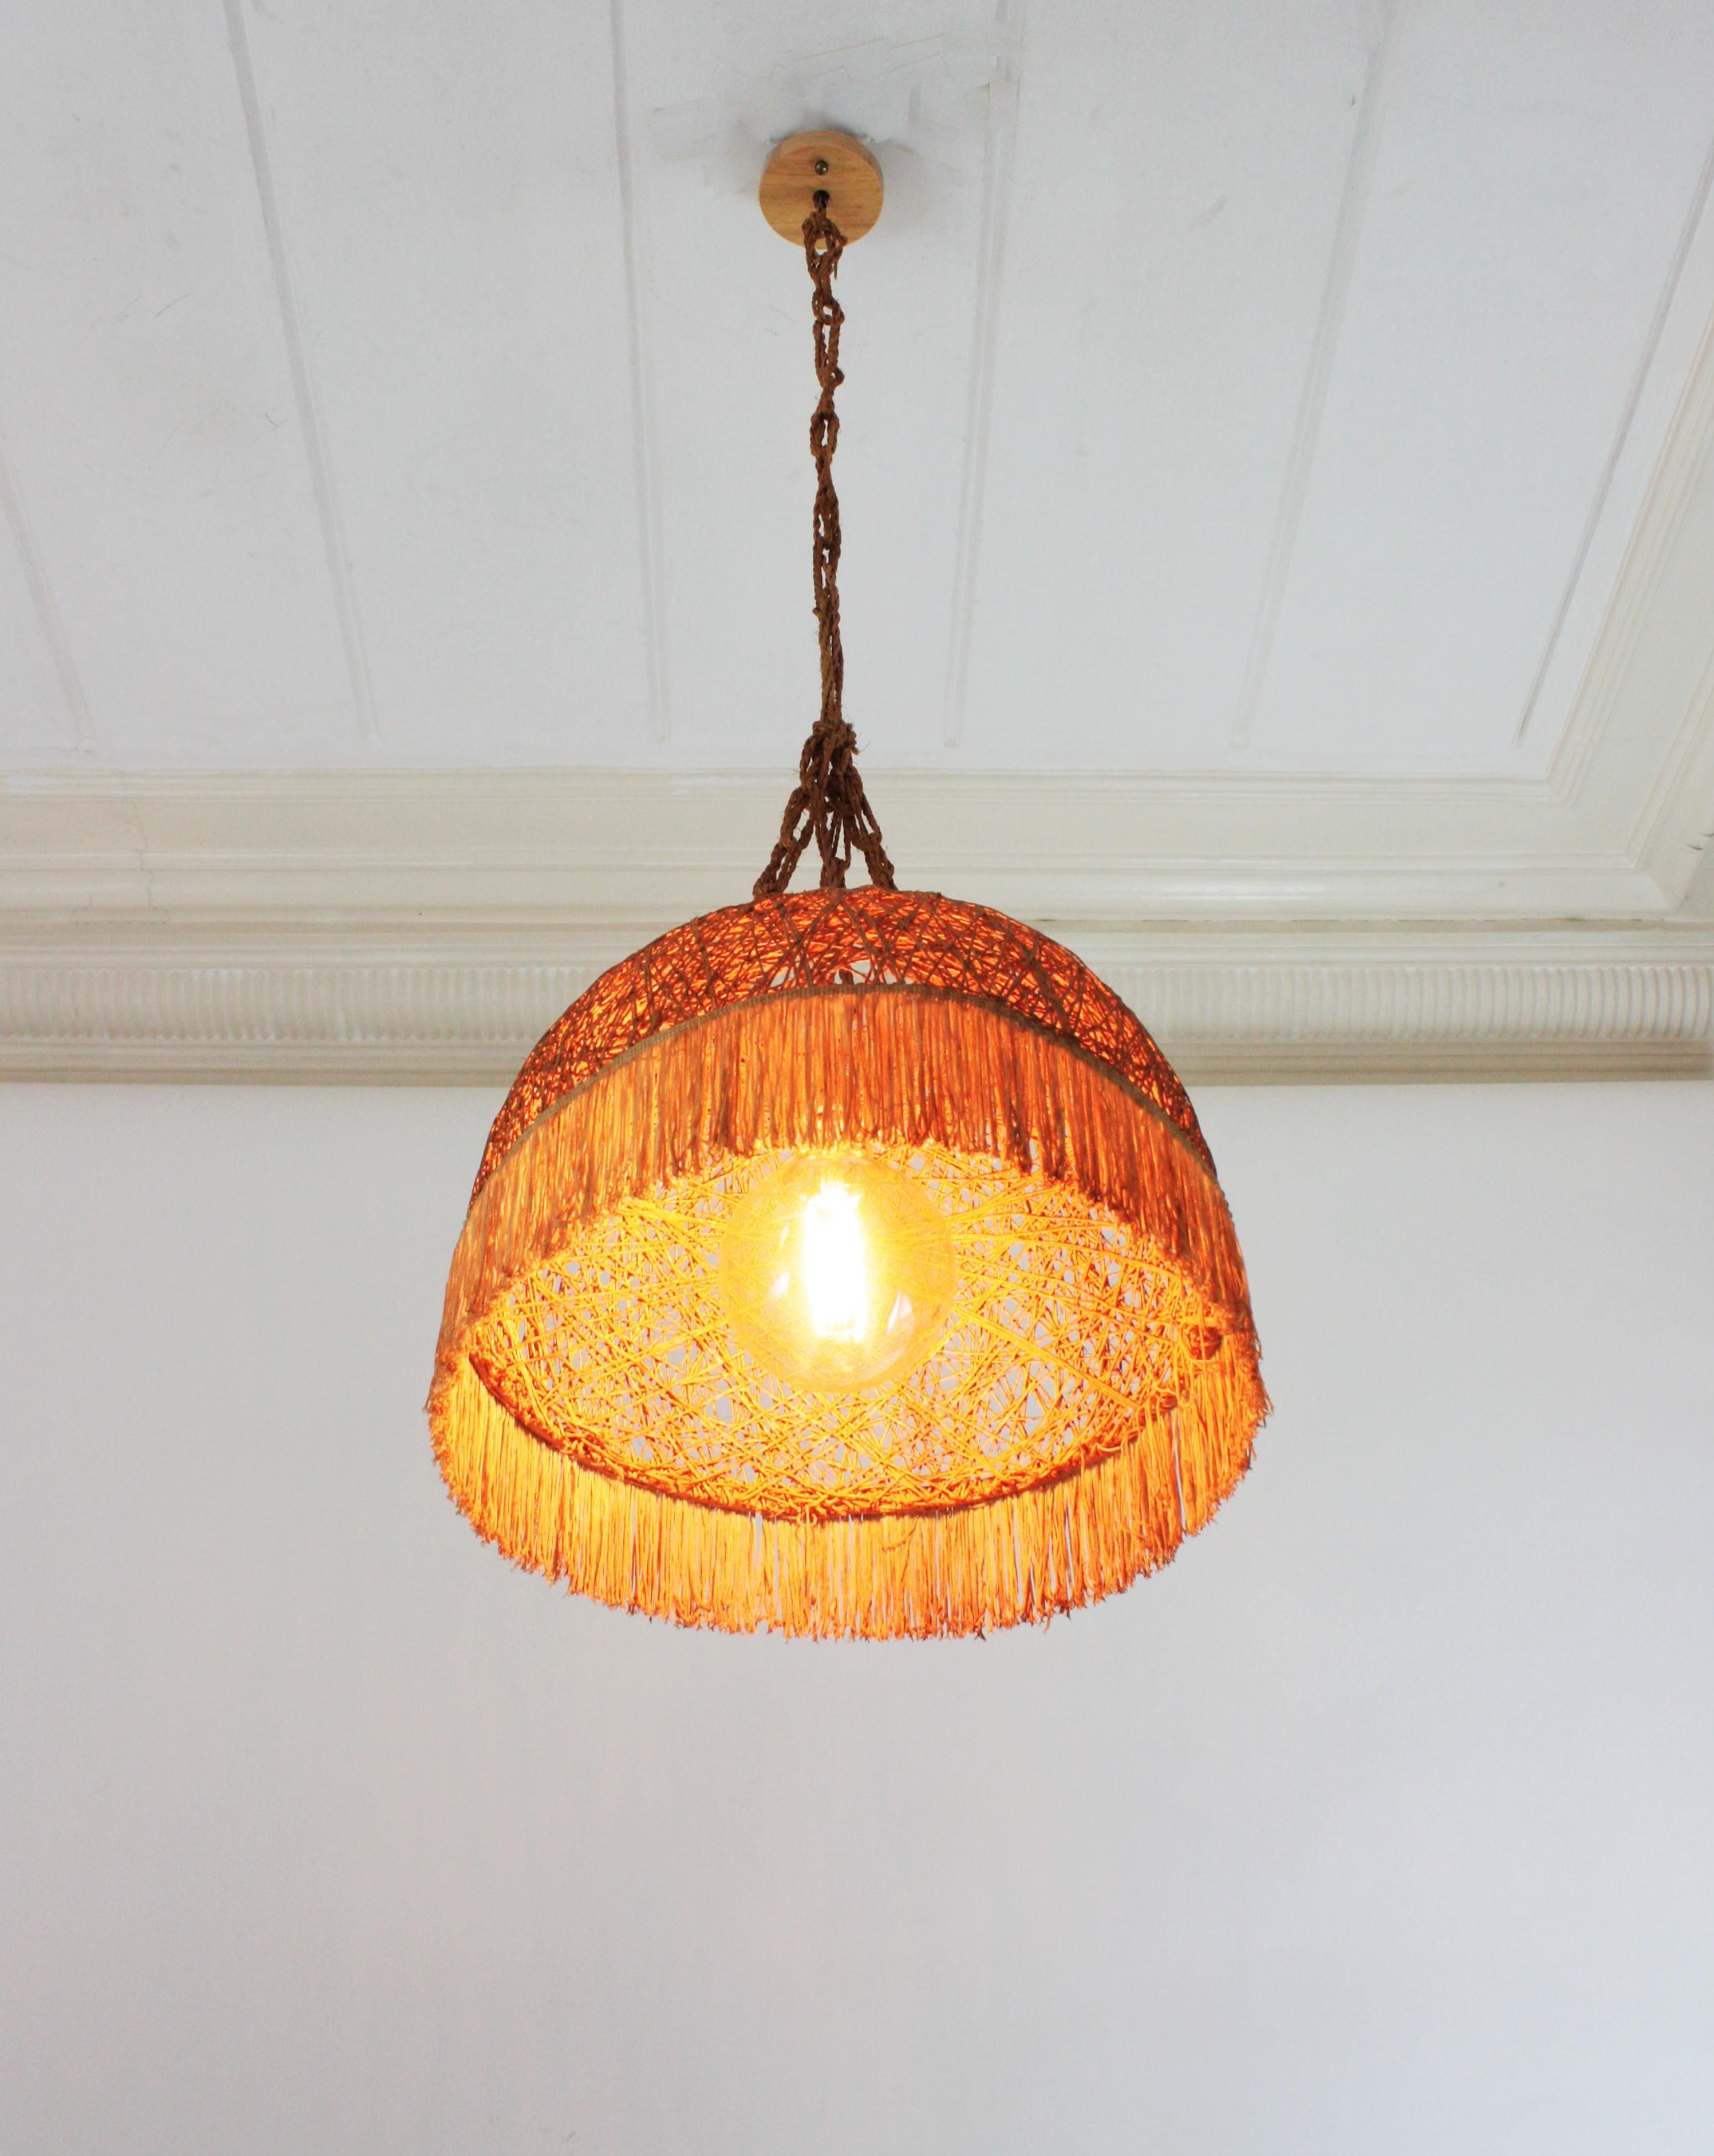 Spanish Rope Hand Woven Pendant Lamp / Suspension with Fringe For Sale 2